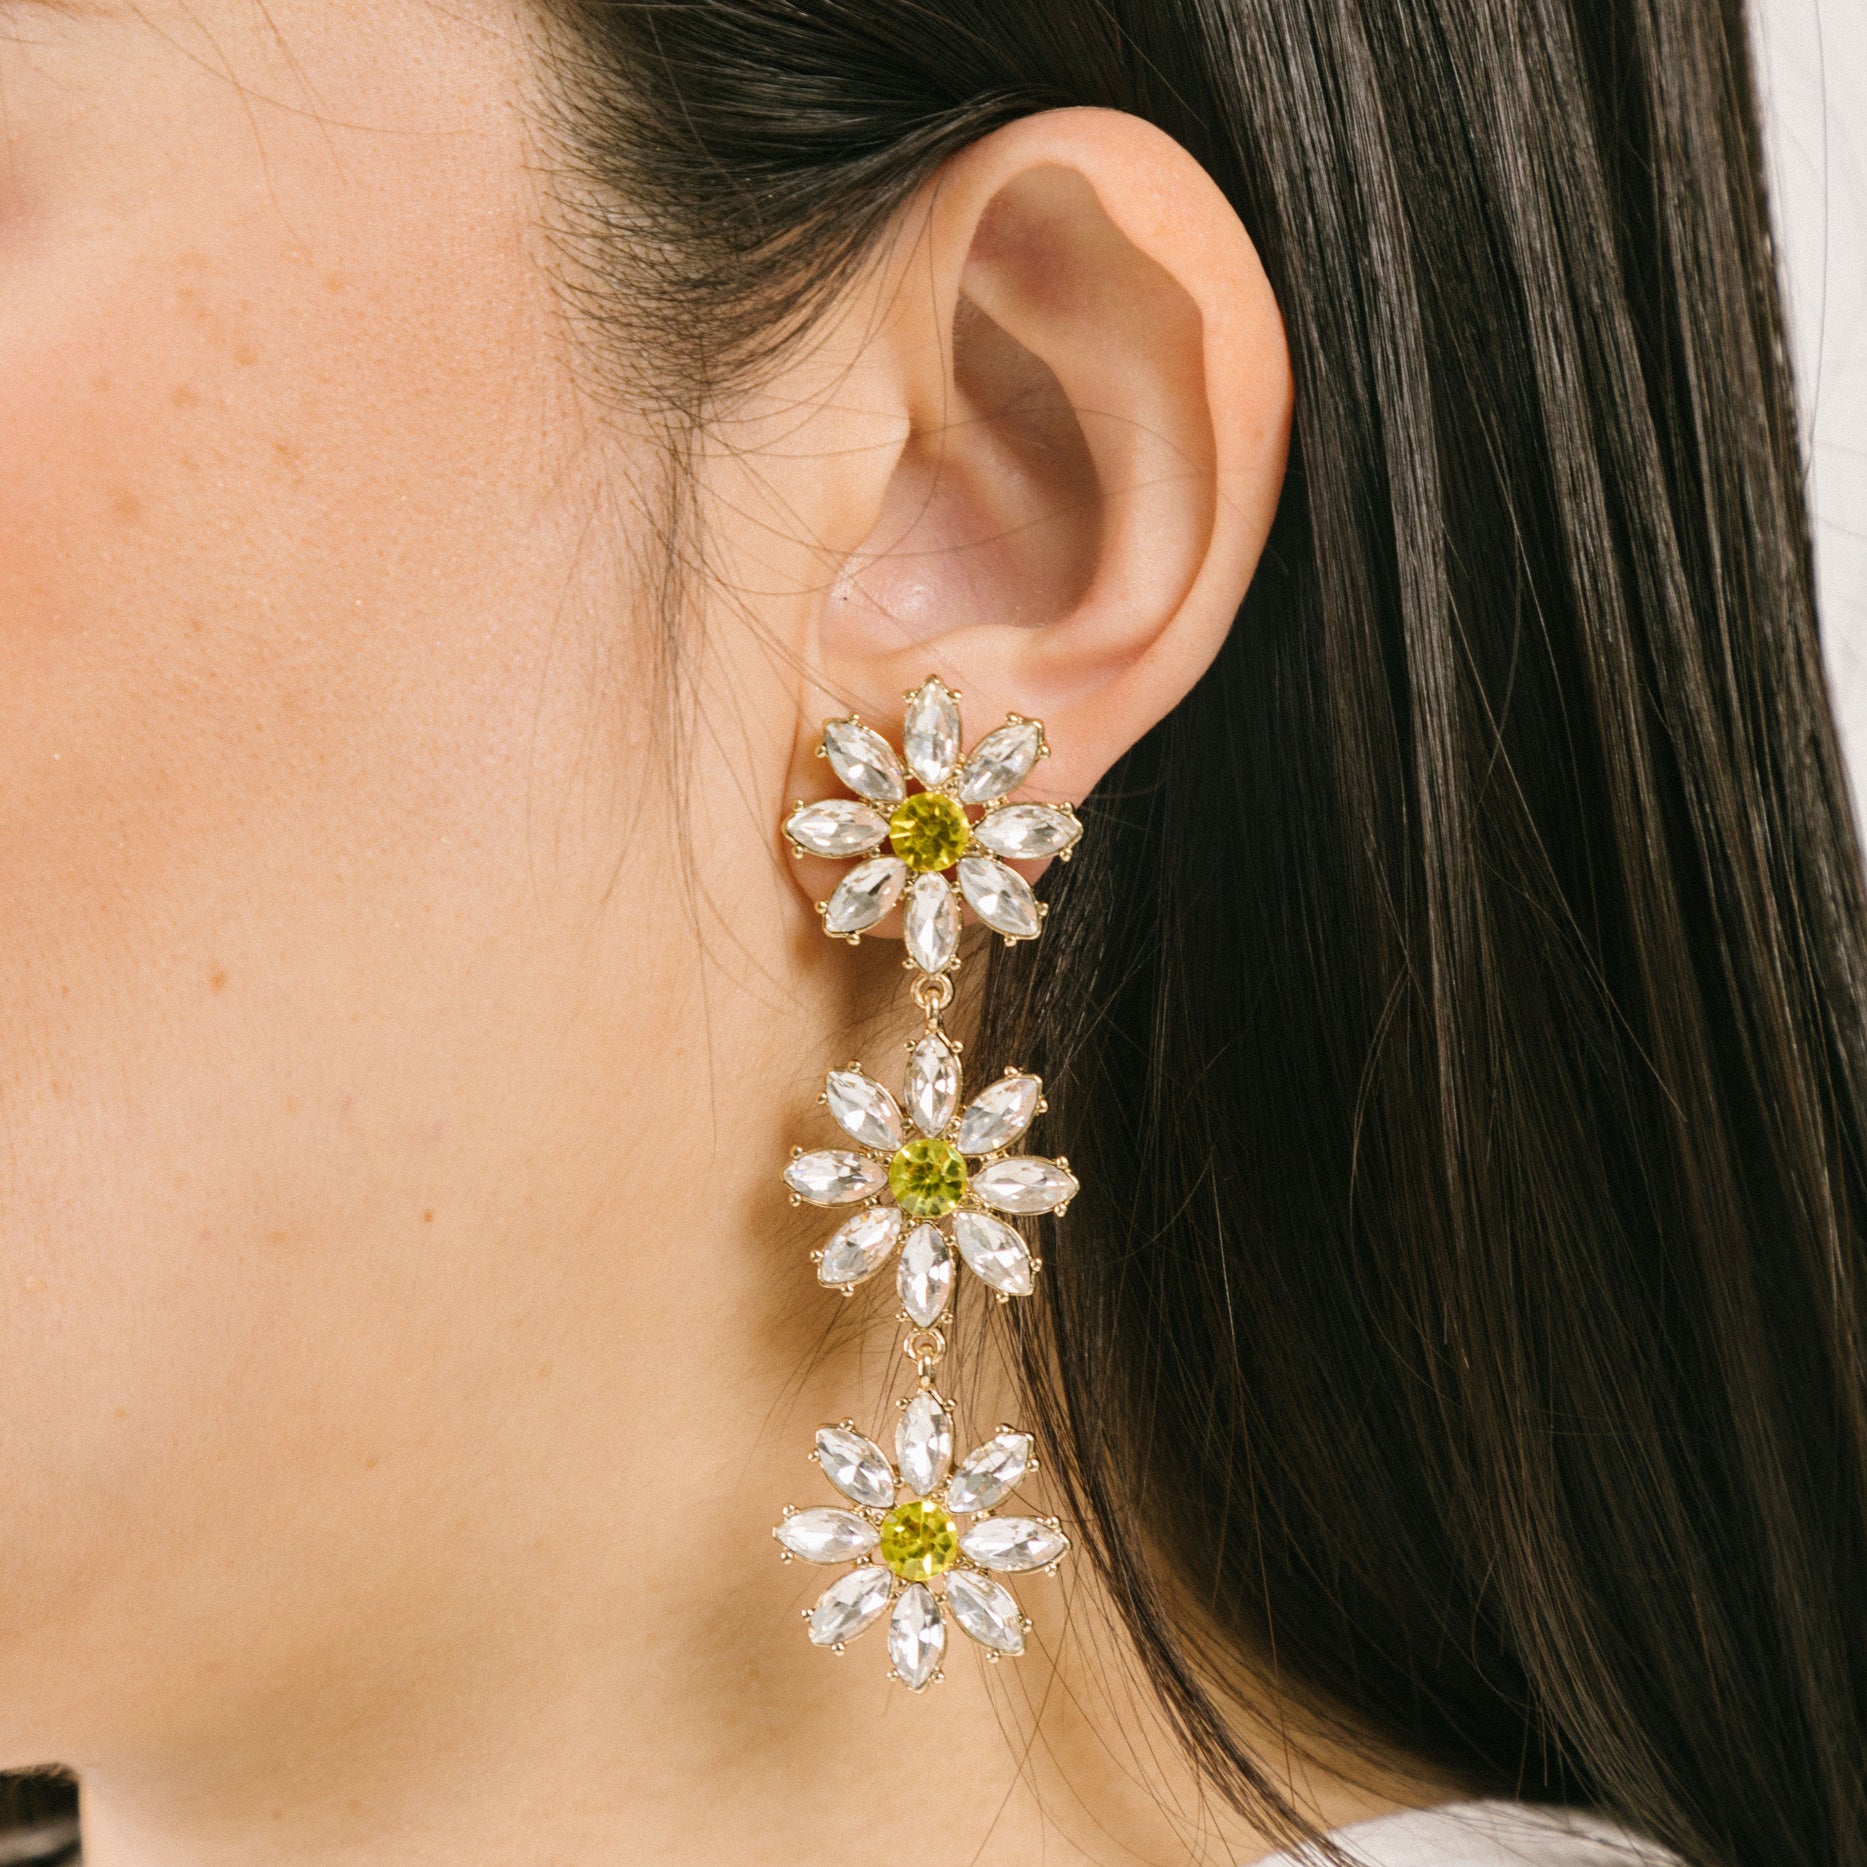 A model wearing the Crystal Flower Drop Clip On Earrings feature a Padded Clip-On closure, perfect for ears of larger proportions as the earrings are on the heavier side. Constructed of gold tone copper alloy and Rhinestone, with detachable rubber padding for added comfort, these earrings provide up to 8-12 hours of easy wear. Sold as one single pair.